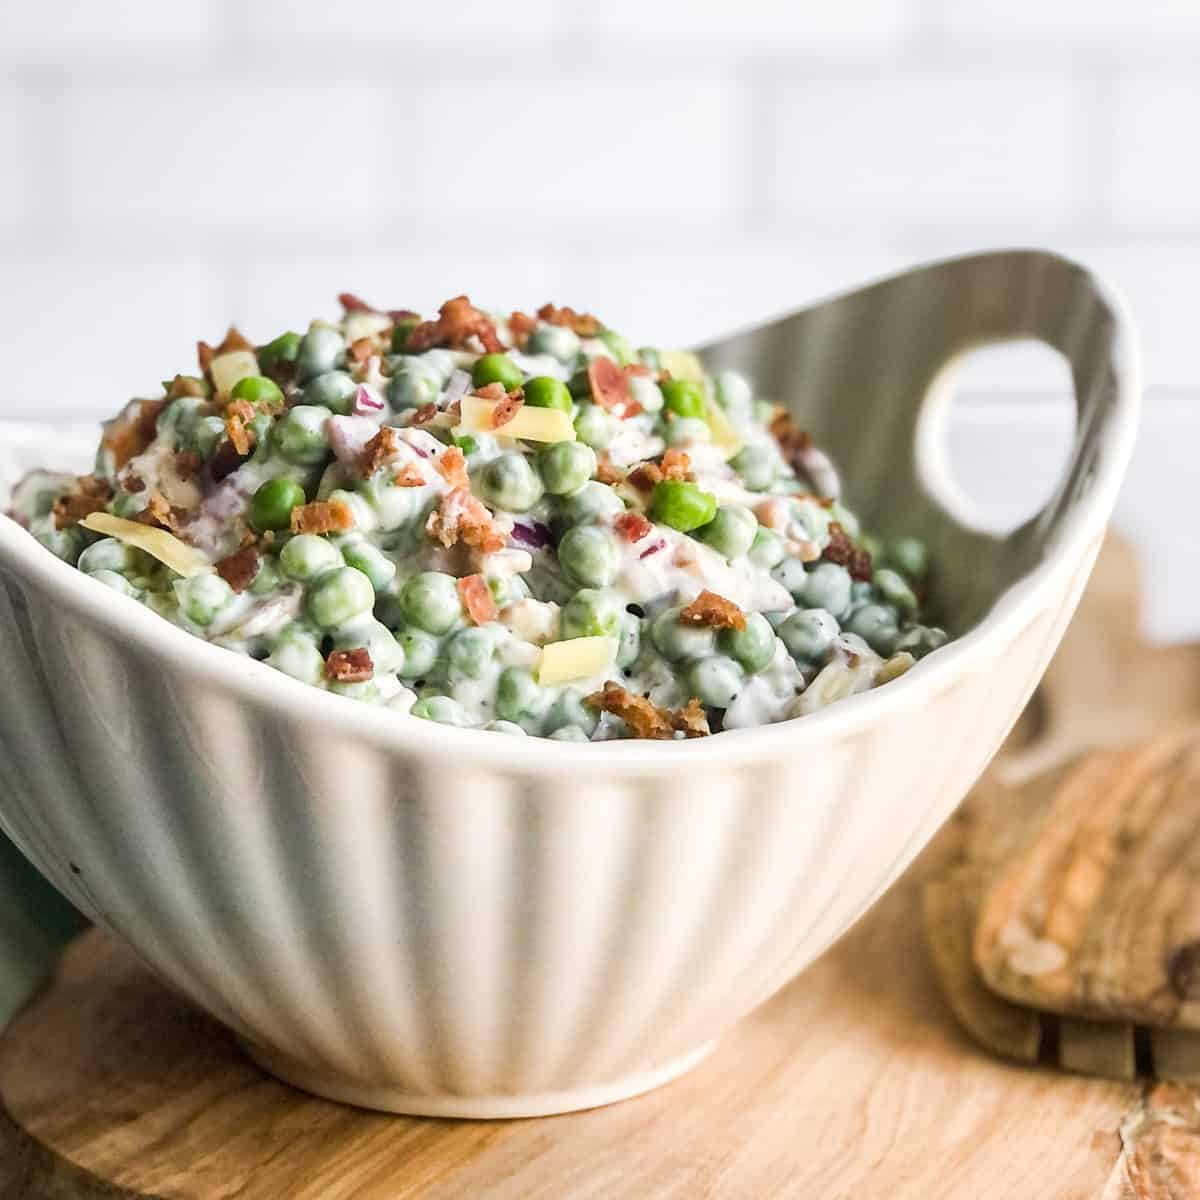 Pea Salad garnished with bacon bits in a white bowl.